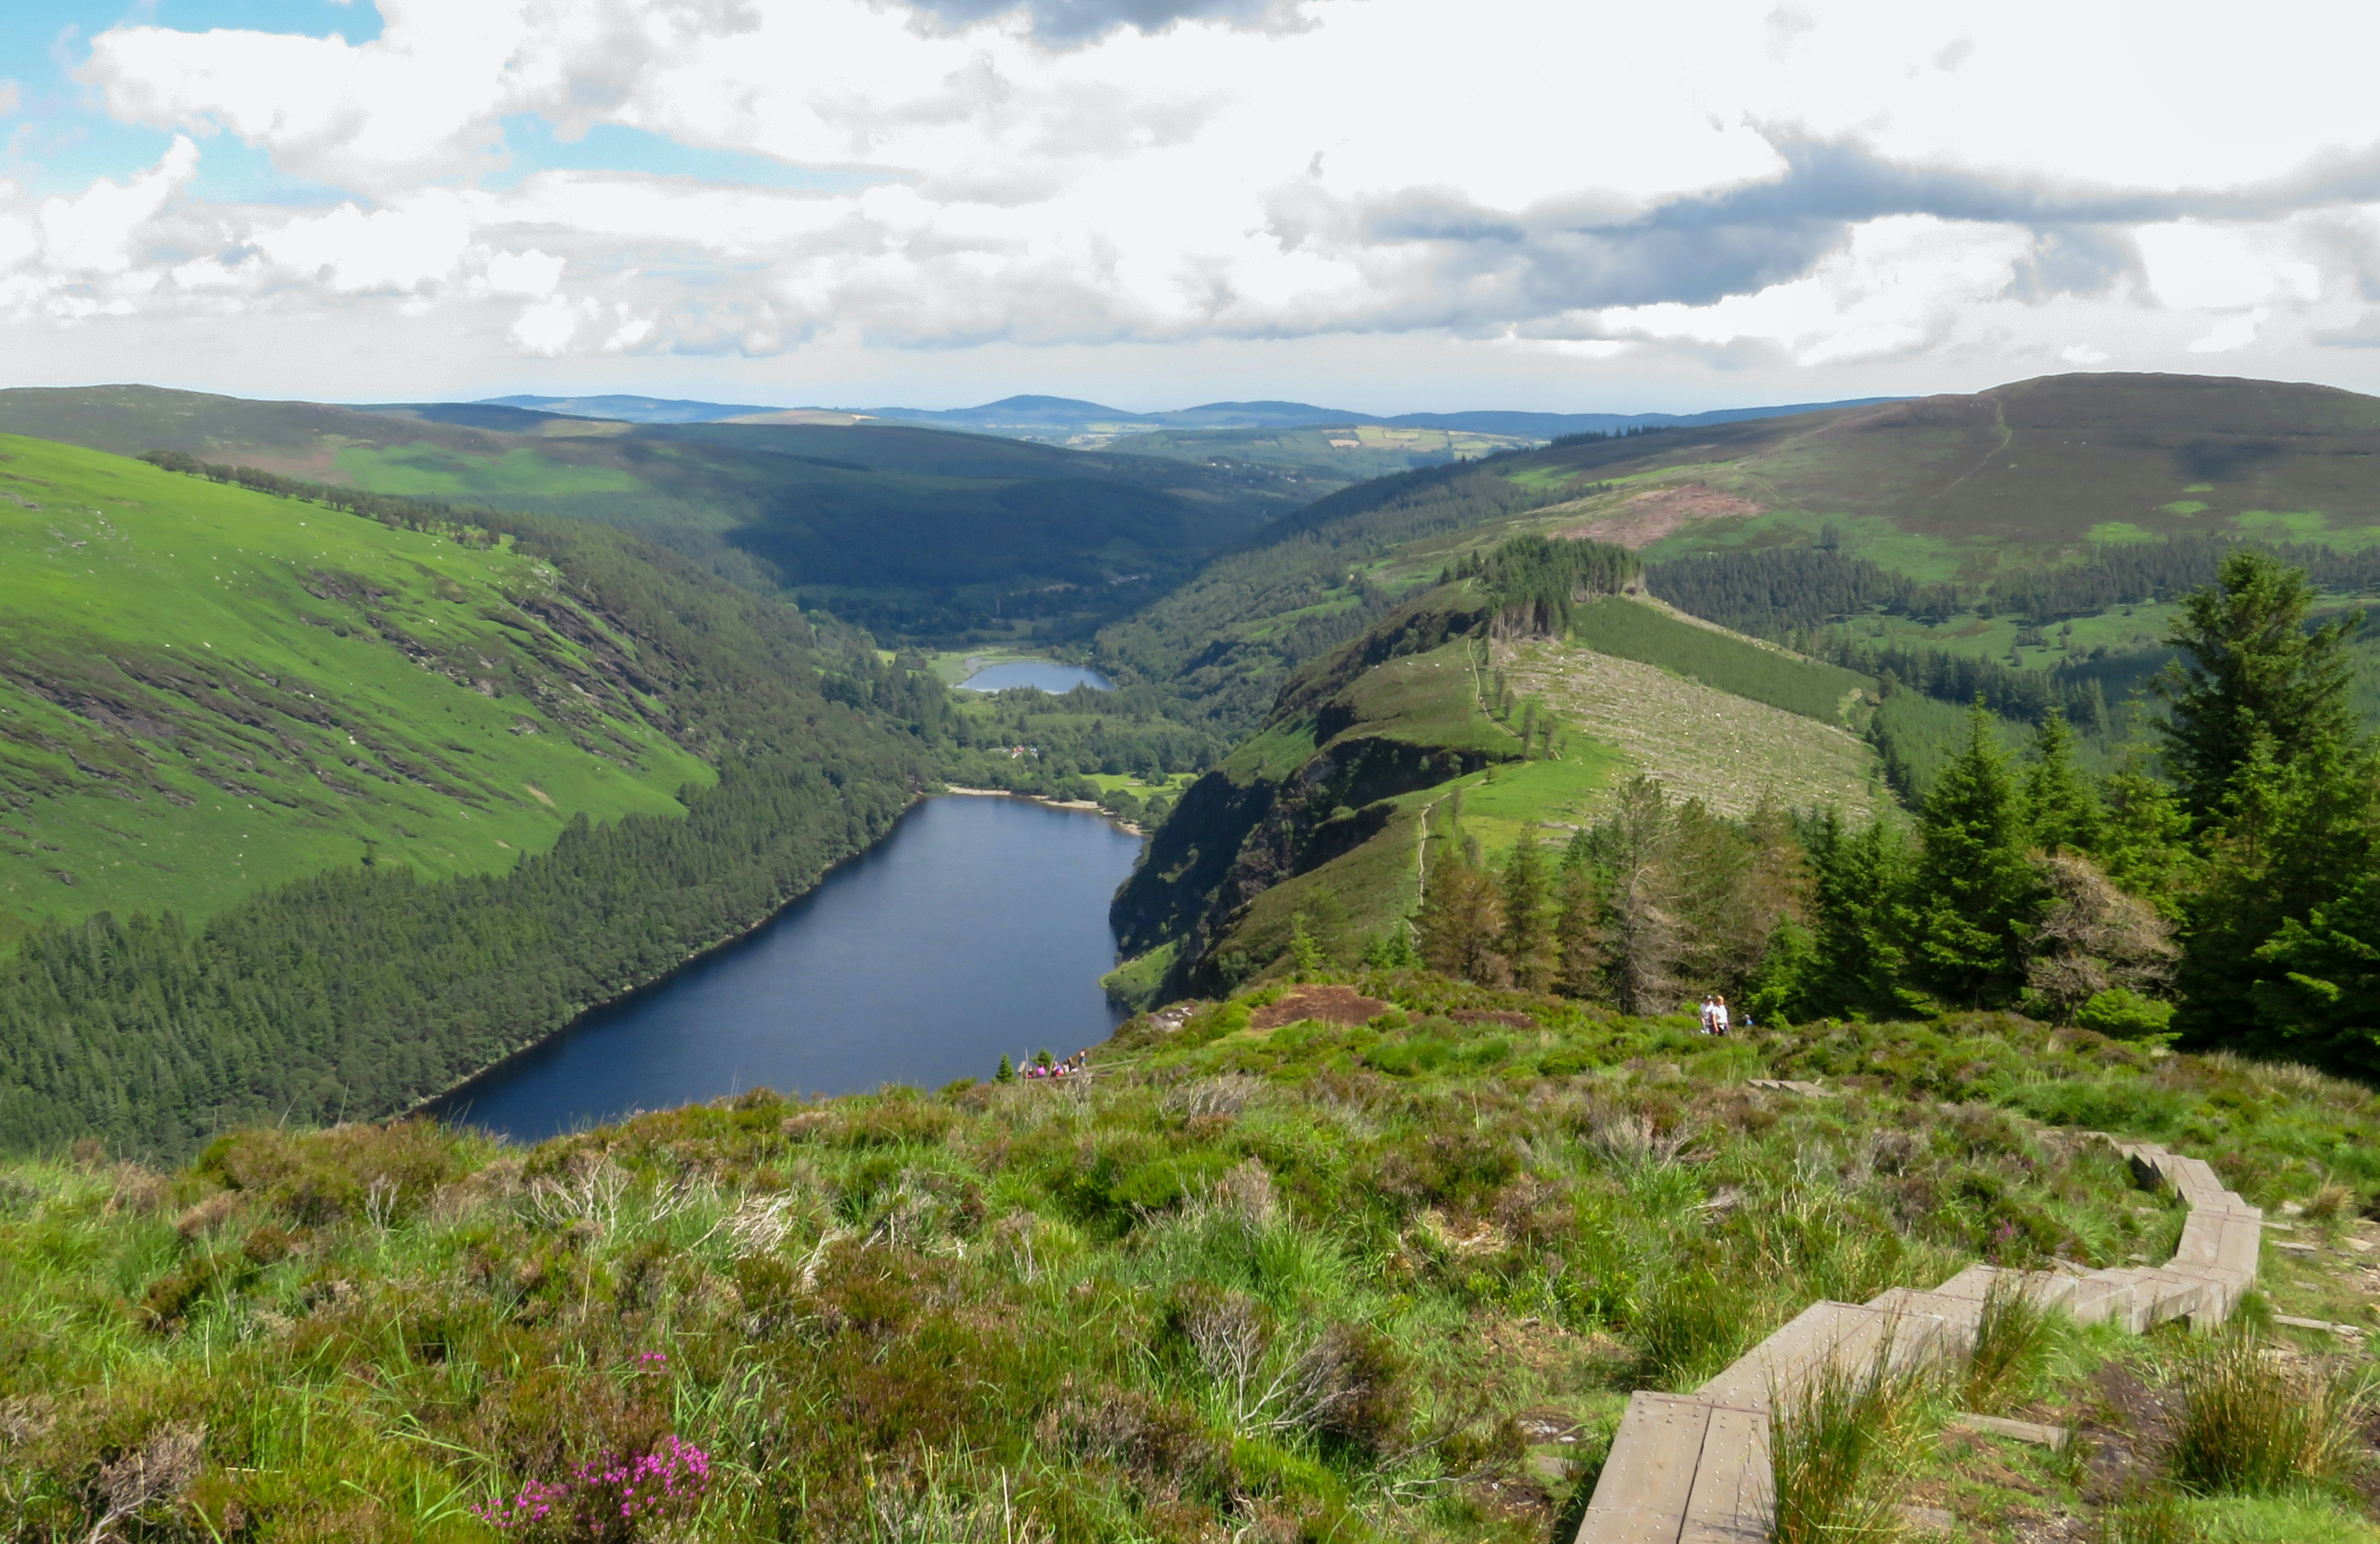 Glendalough and the Spinc Cliggs, County Wicklow